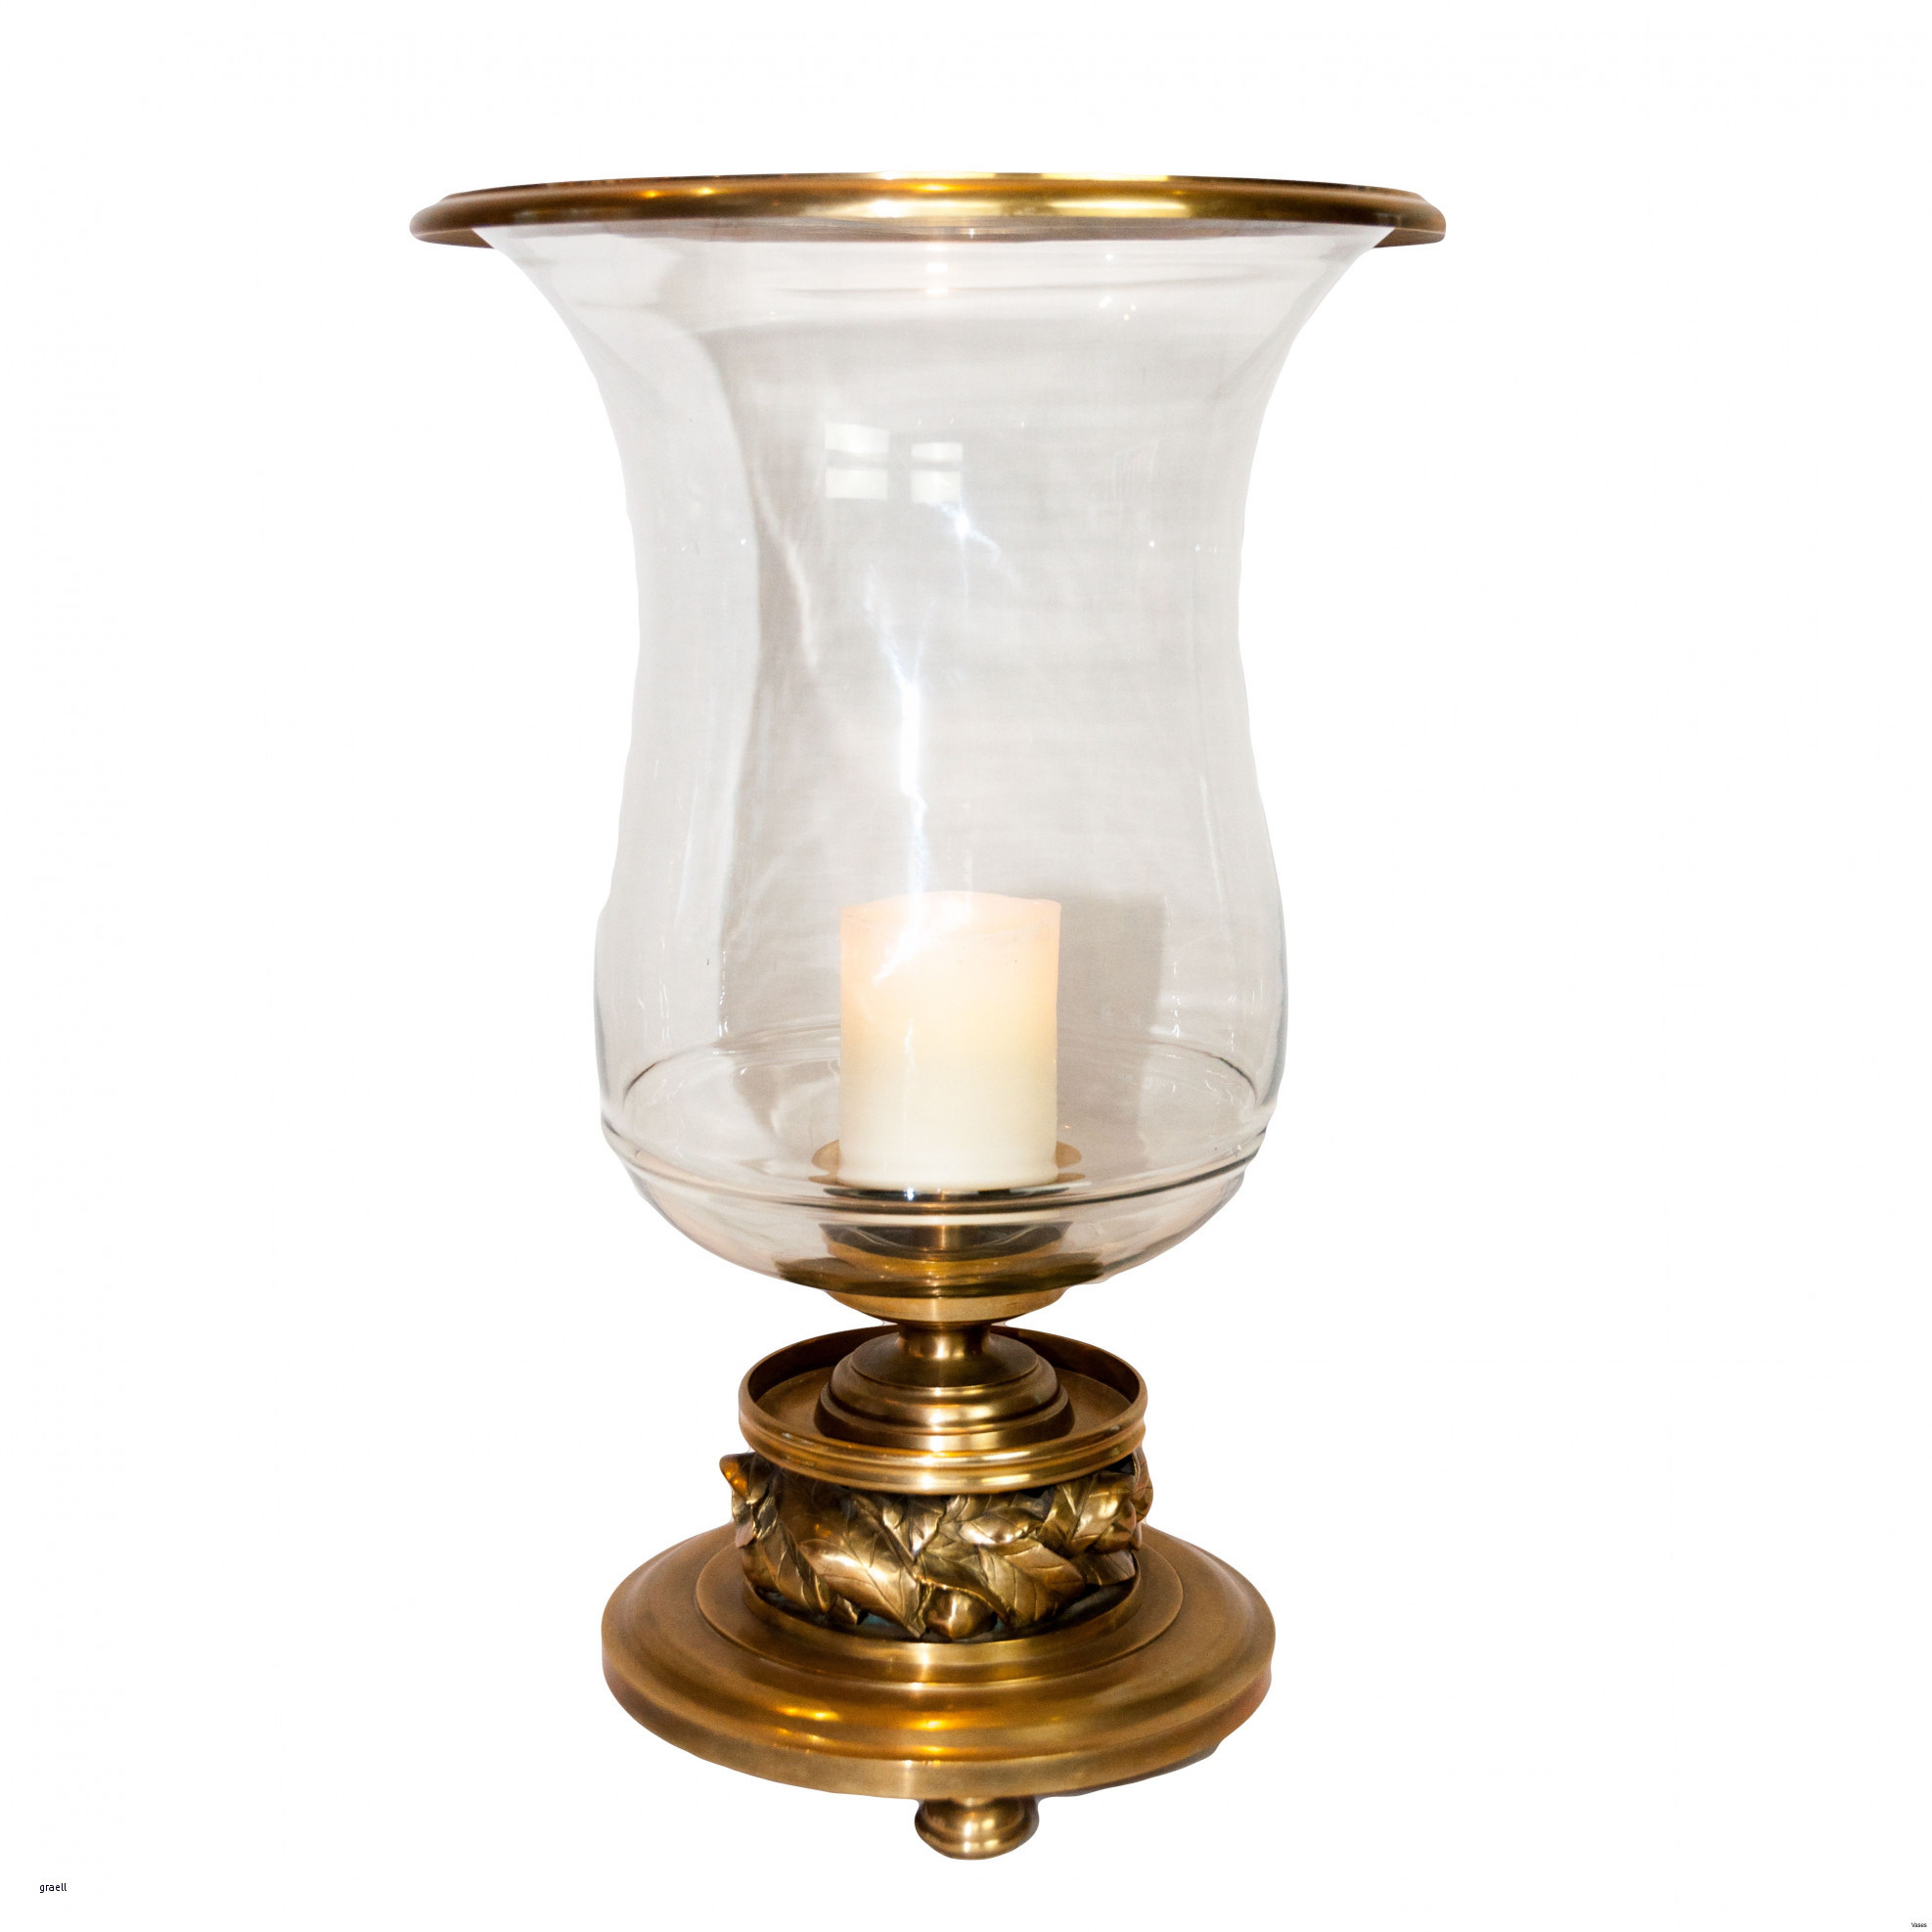 27 Fantastic Vintage Glass Vases 2024 free download vintage glass vases of bronze lamp luxury antique brass floor lamp beautiful ao3 210h vases with regard to bronze lamp luxury antique brass floor lamp beautiful ao3 210h vases hurricane lamp